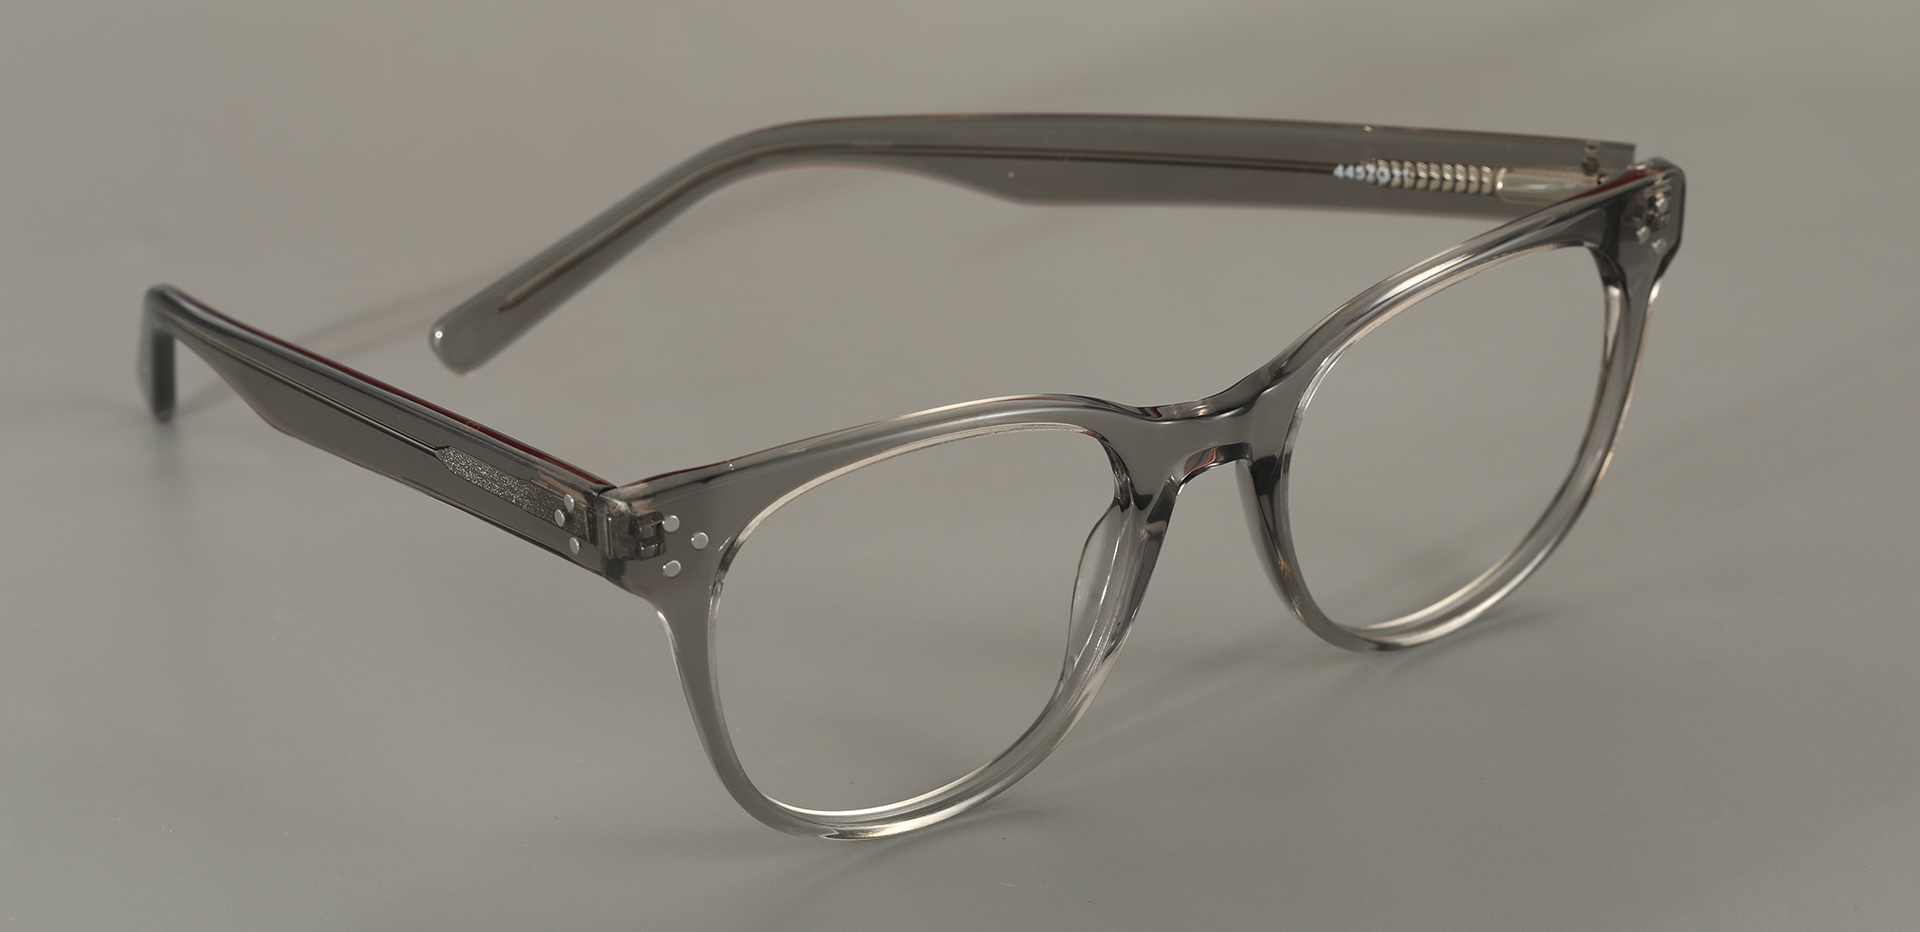 Orwell Oval Reading Glasses - Gray